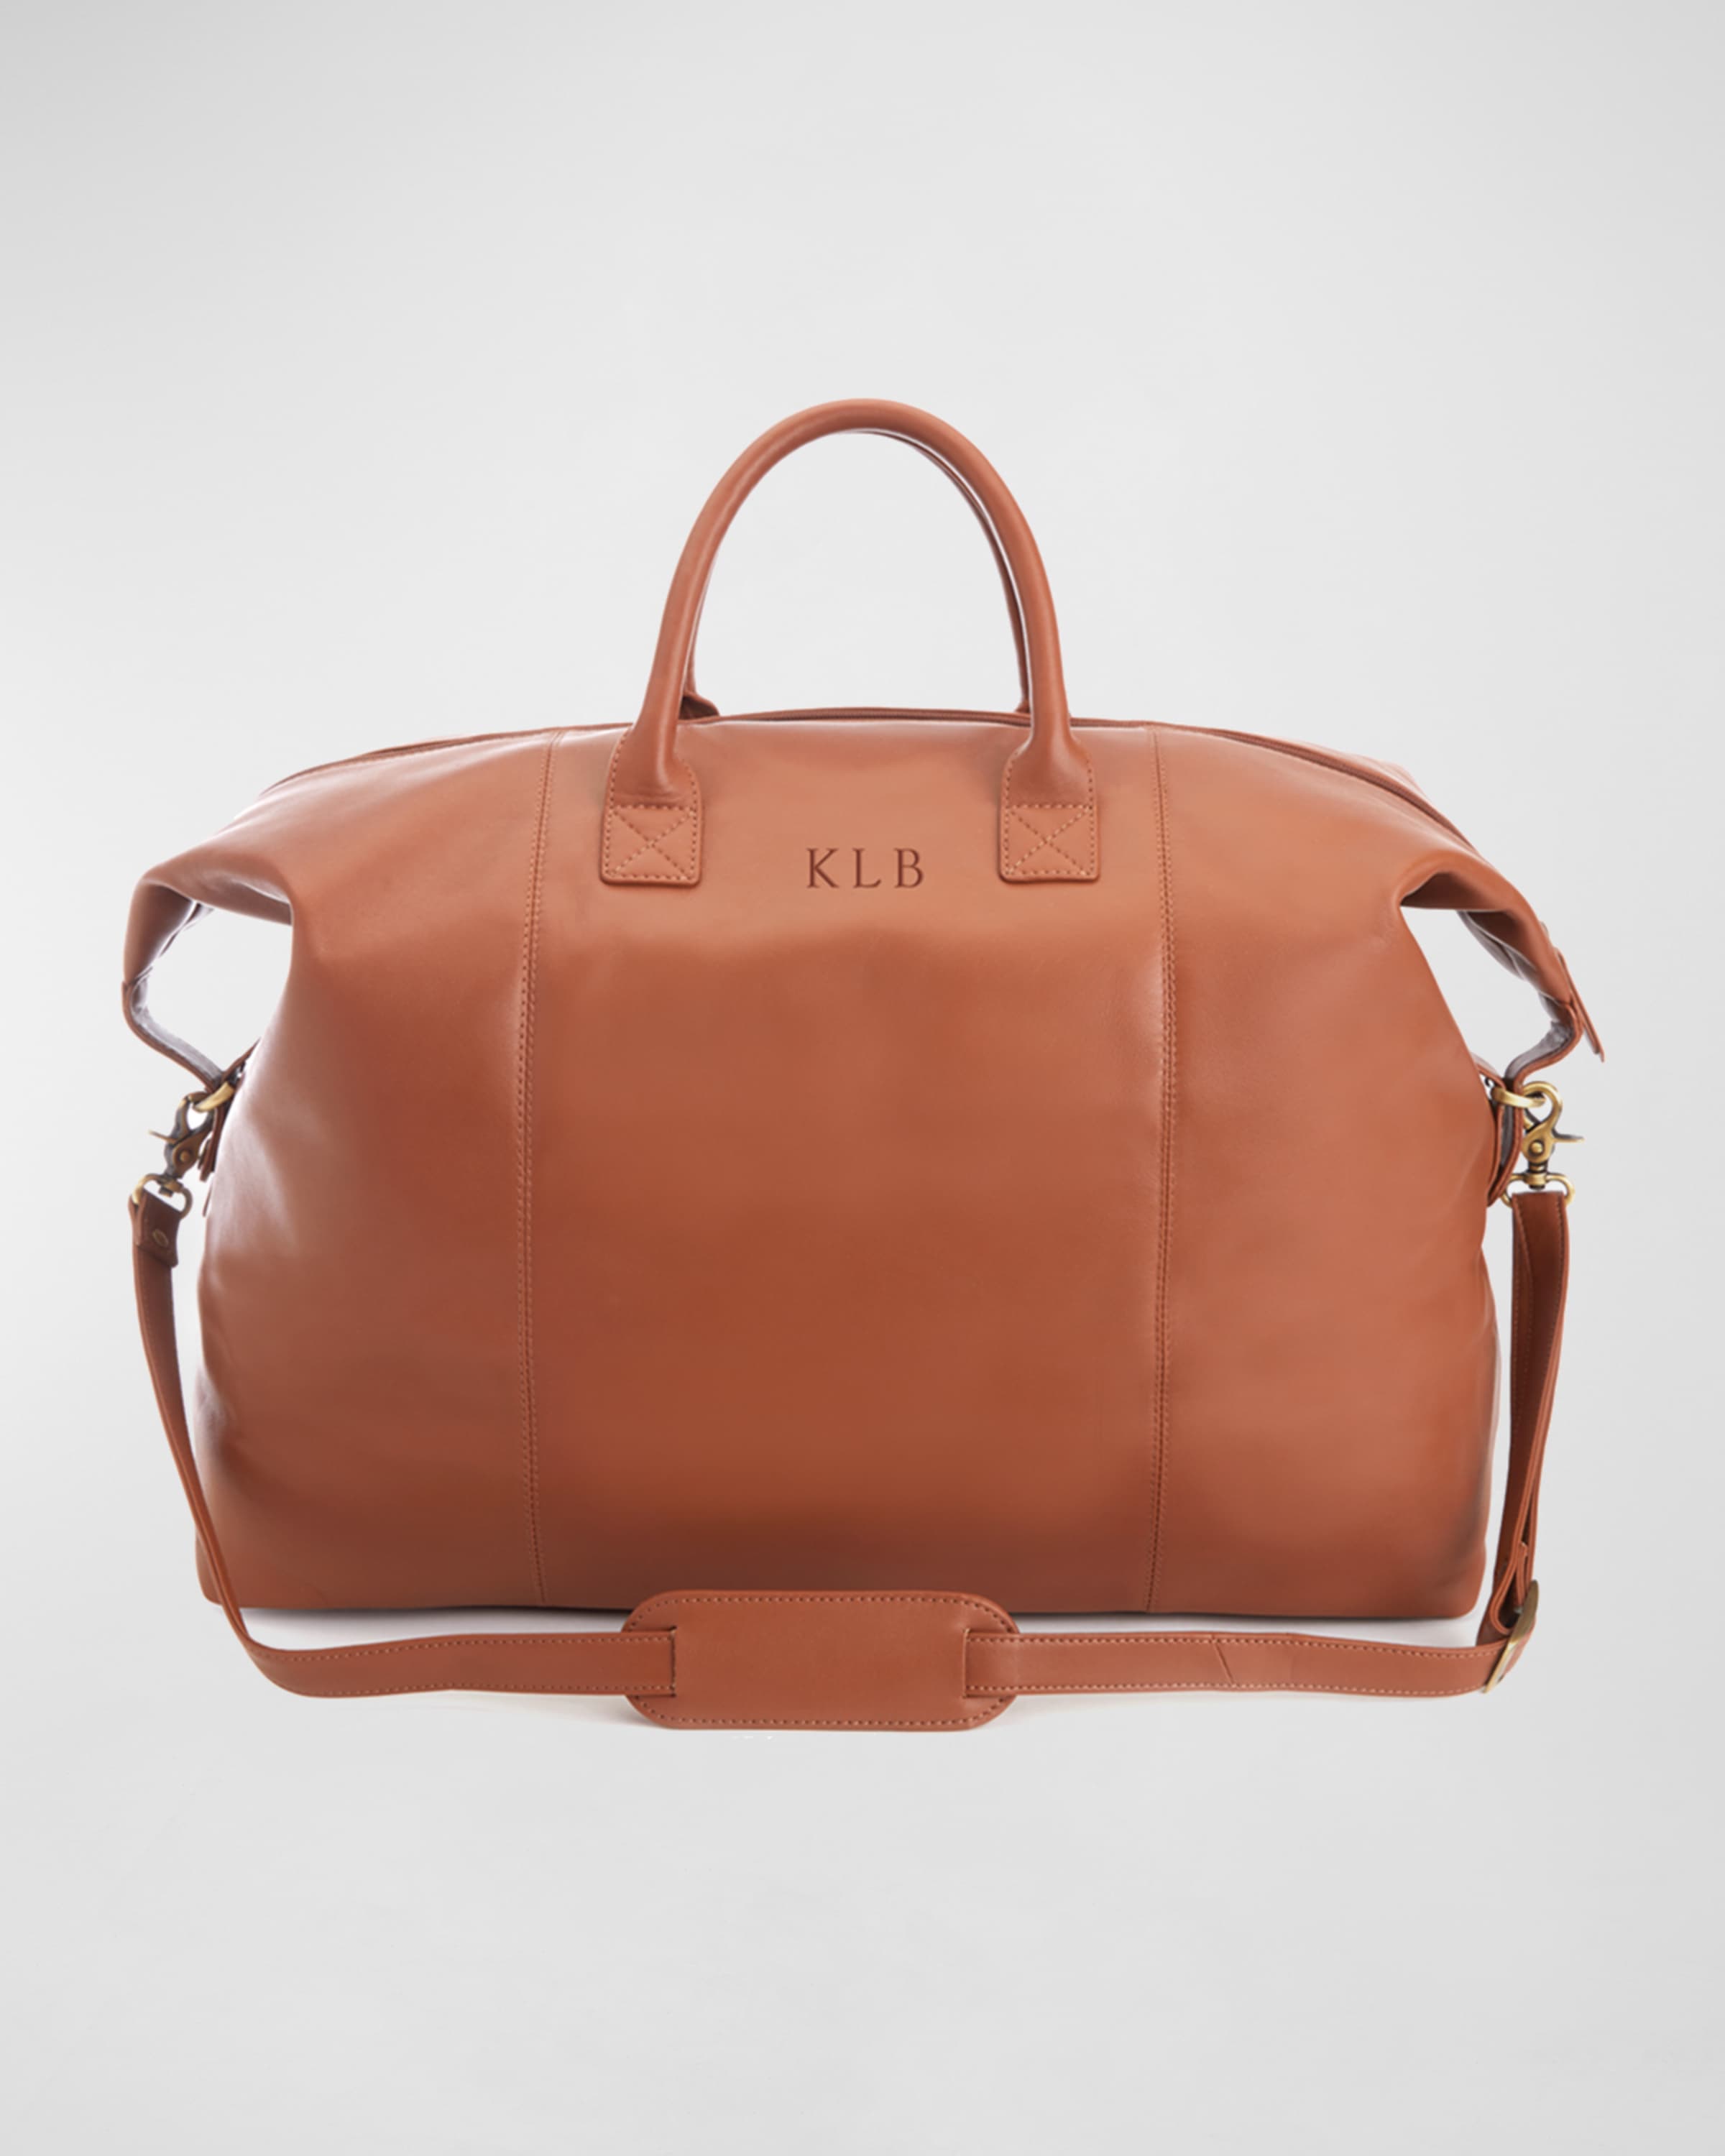 Best luxury gifts for men who have everything: leather duffel bag